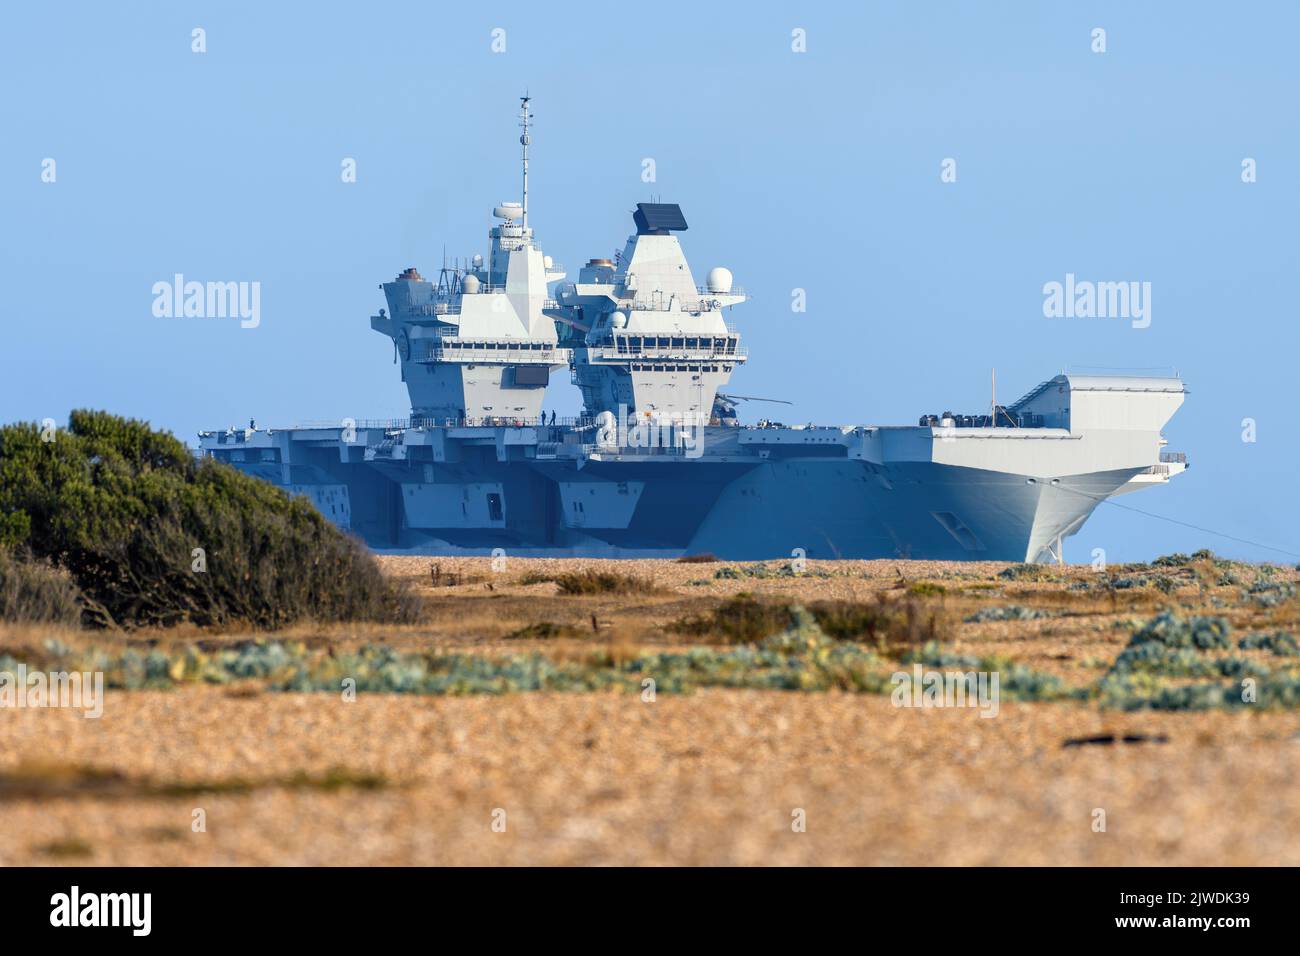 The Royal Navy Queen Elizabeth class aircraft carrier HMS Prince of Wales (R09) approaching the Solent anchorages. Stock Photo